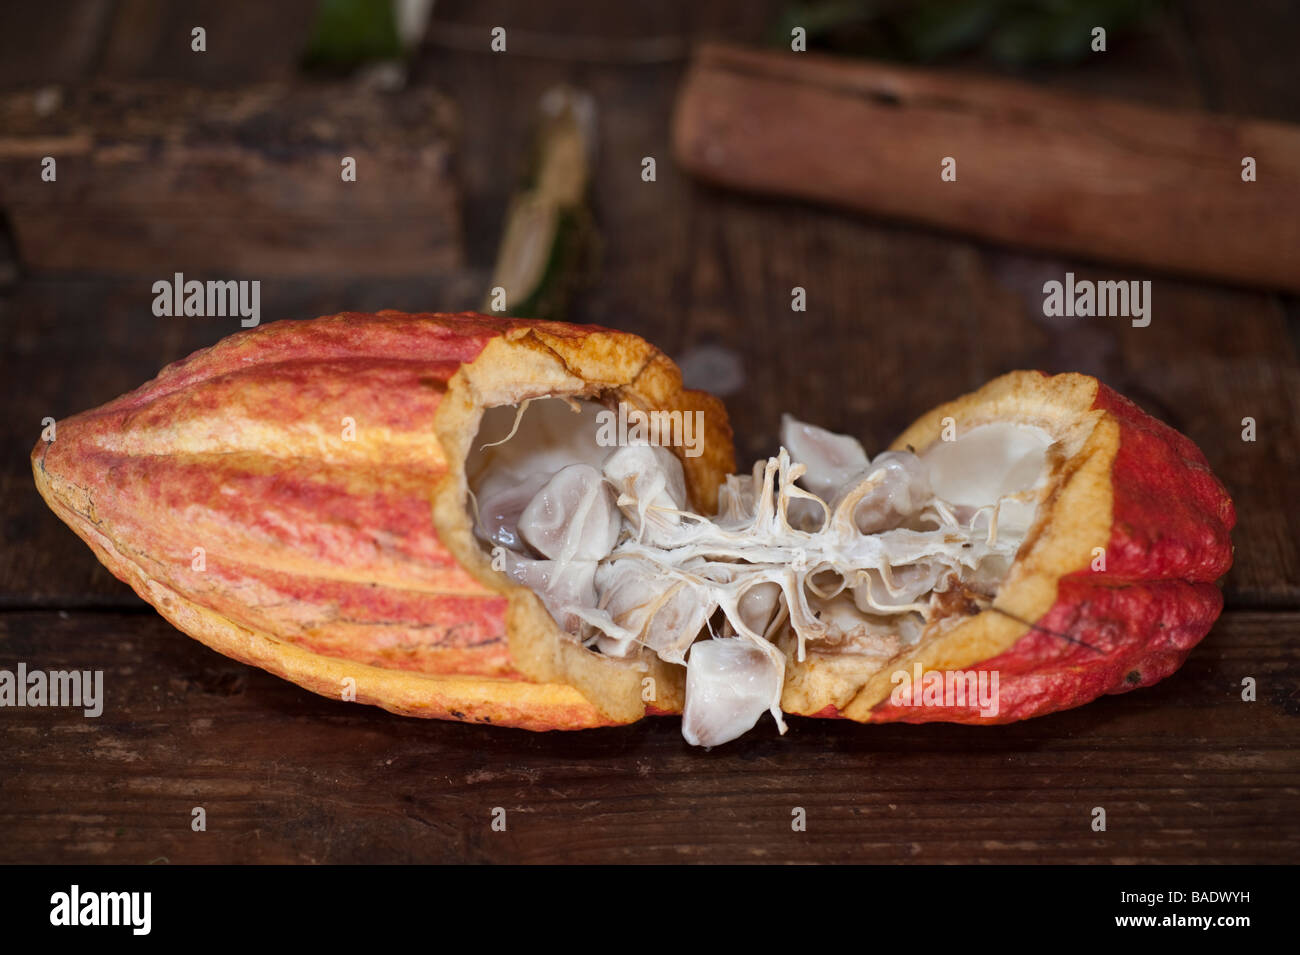 Theobroma cacao or cocoa tree pod split open to show the seeds used to make cocoa or chocolate Stock Photo